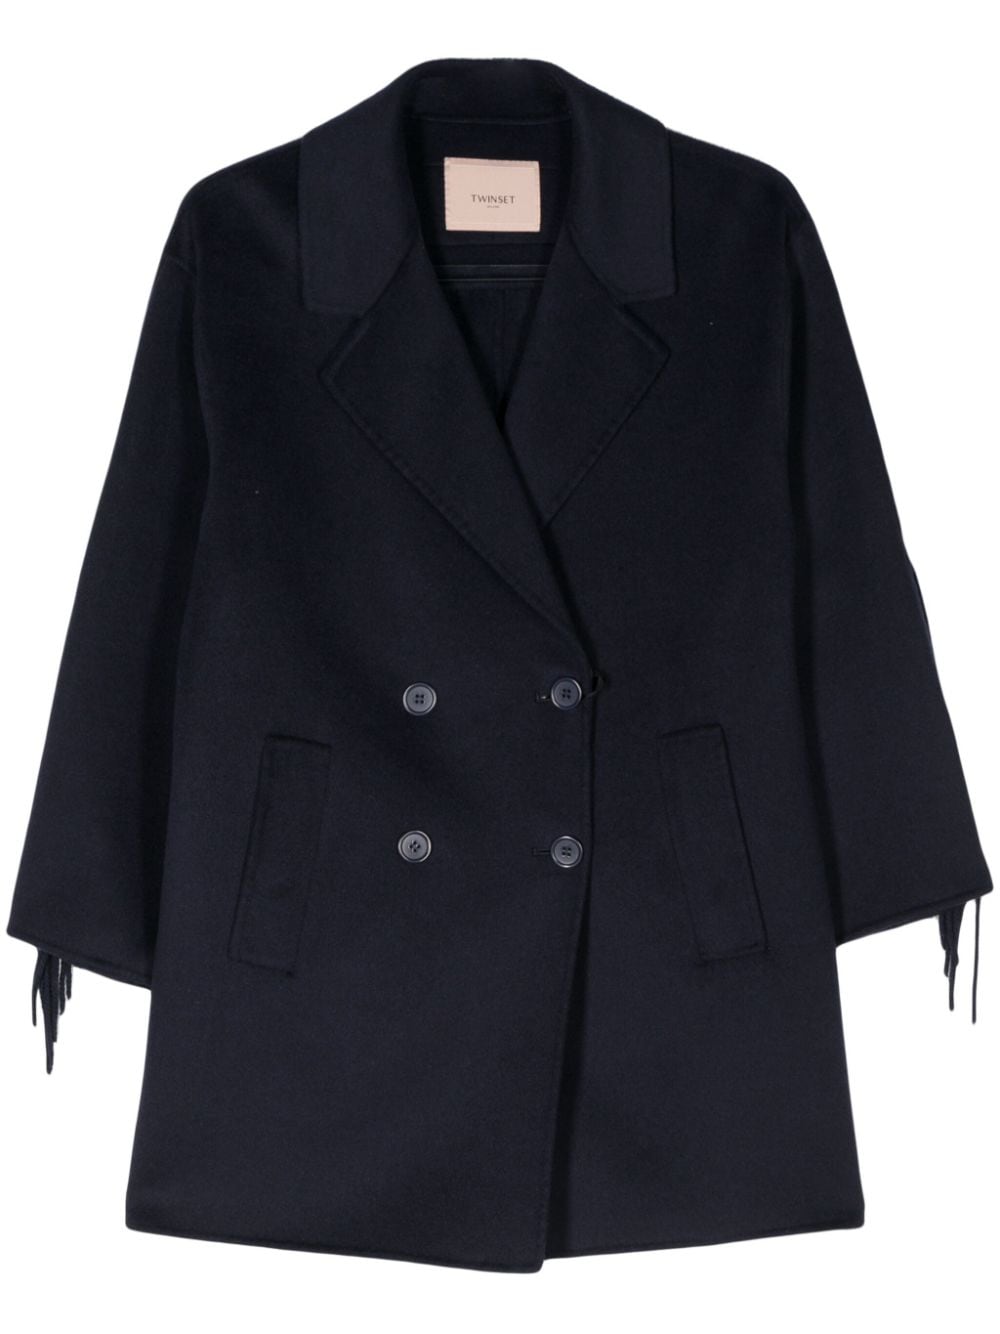 TWINSET fringed double-breasted coat - Blue von TWINSET